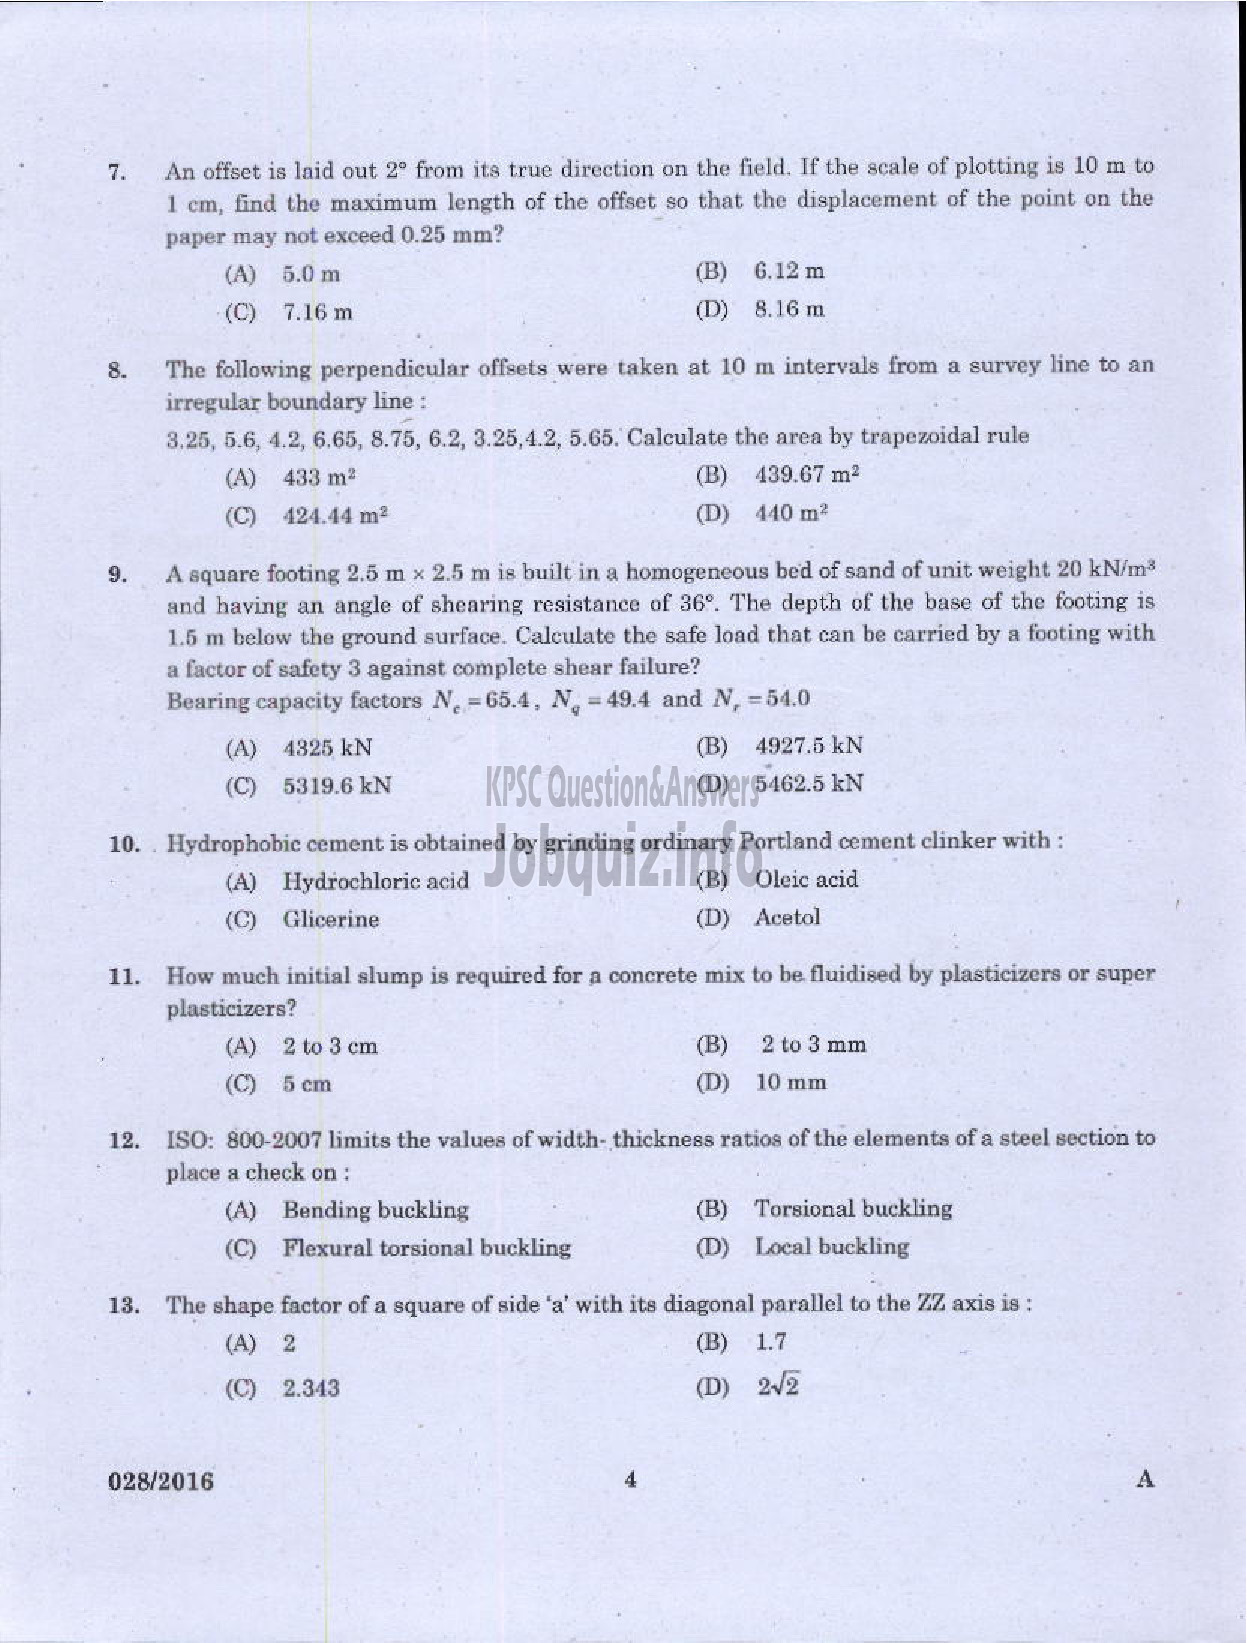 Kerala PSC Question Paper - ASSISTANT ENGINEER DIRECT/BY TRANSFER KERALA WATER AUTHORITY-2